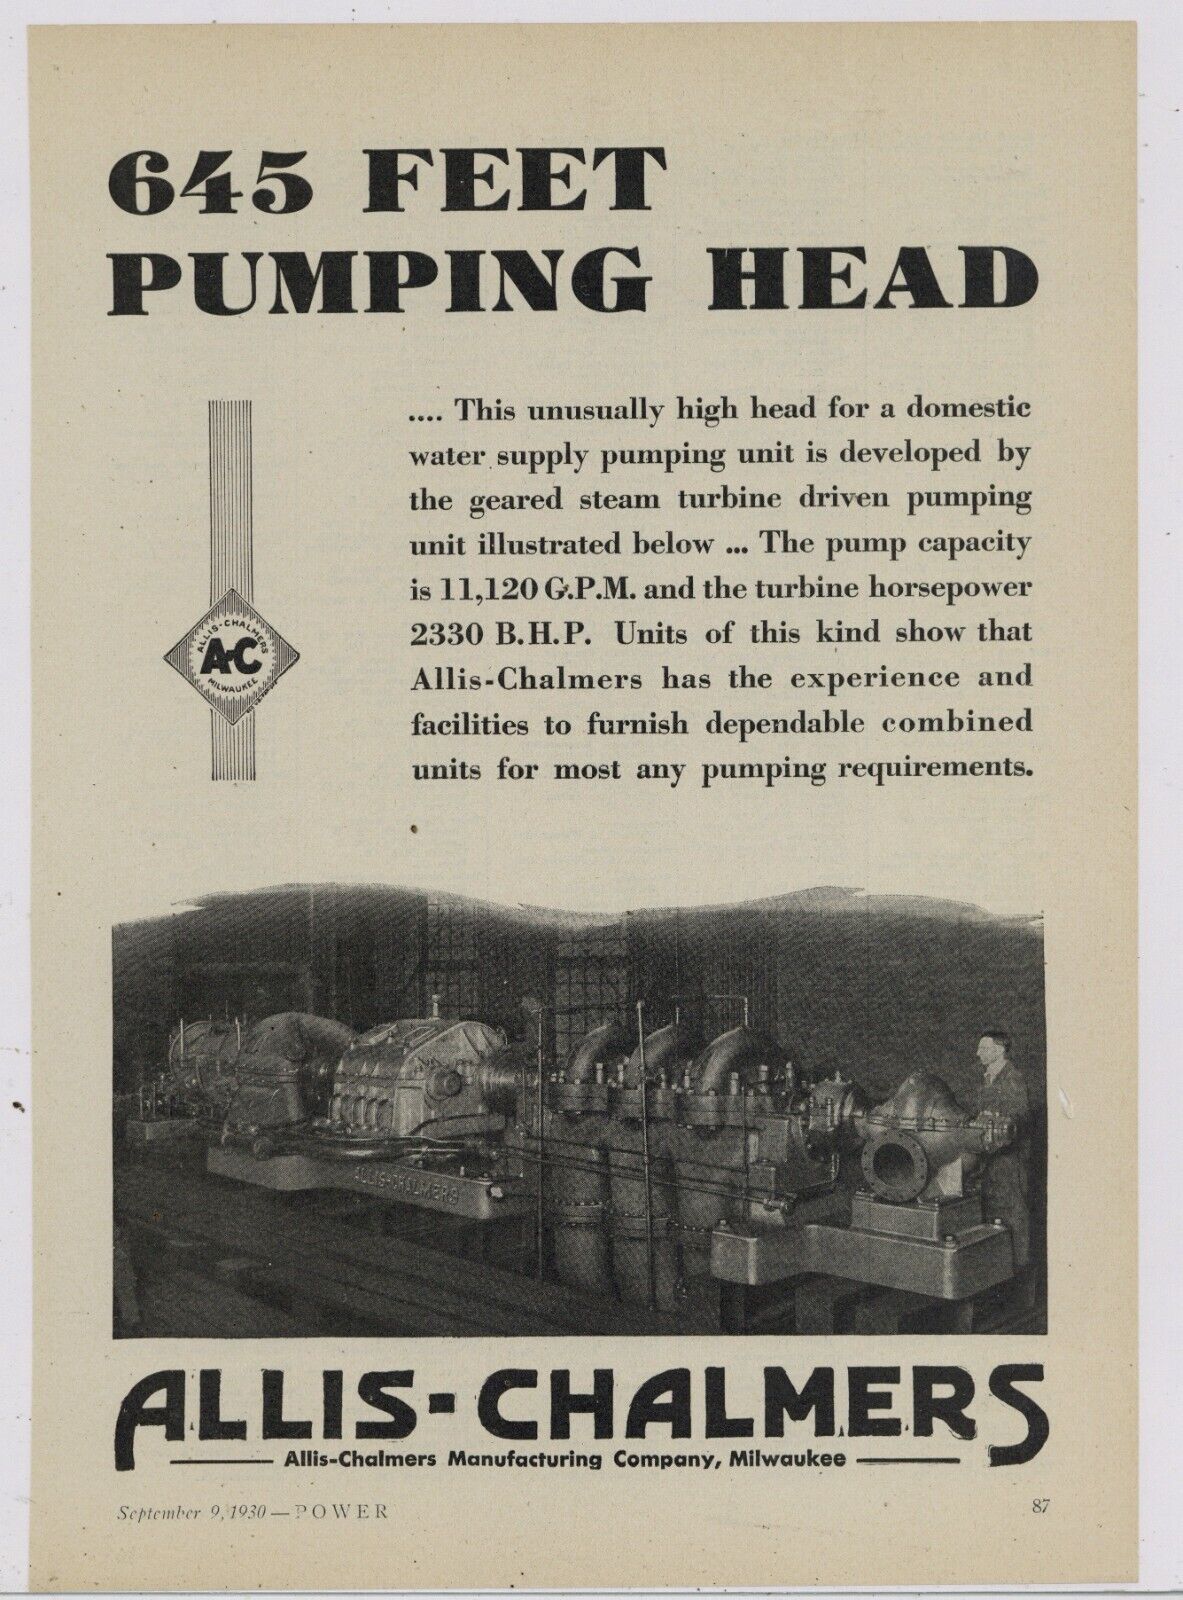 1930 Allis Chalmers Ad: Maker of Combined Units for Most Pumping Requirements